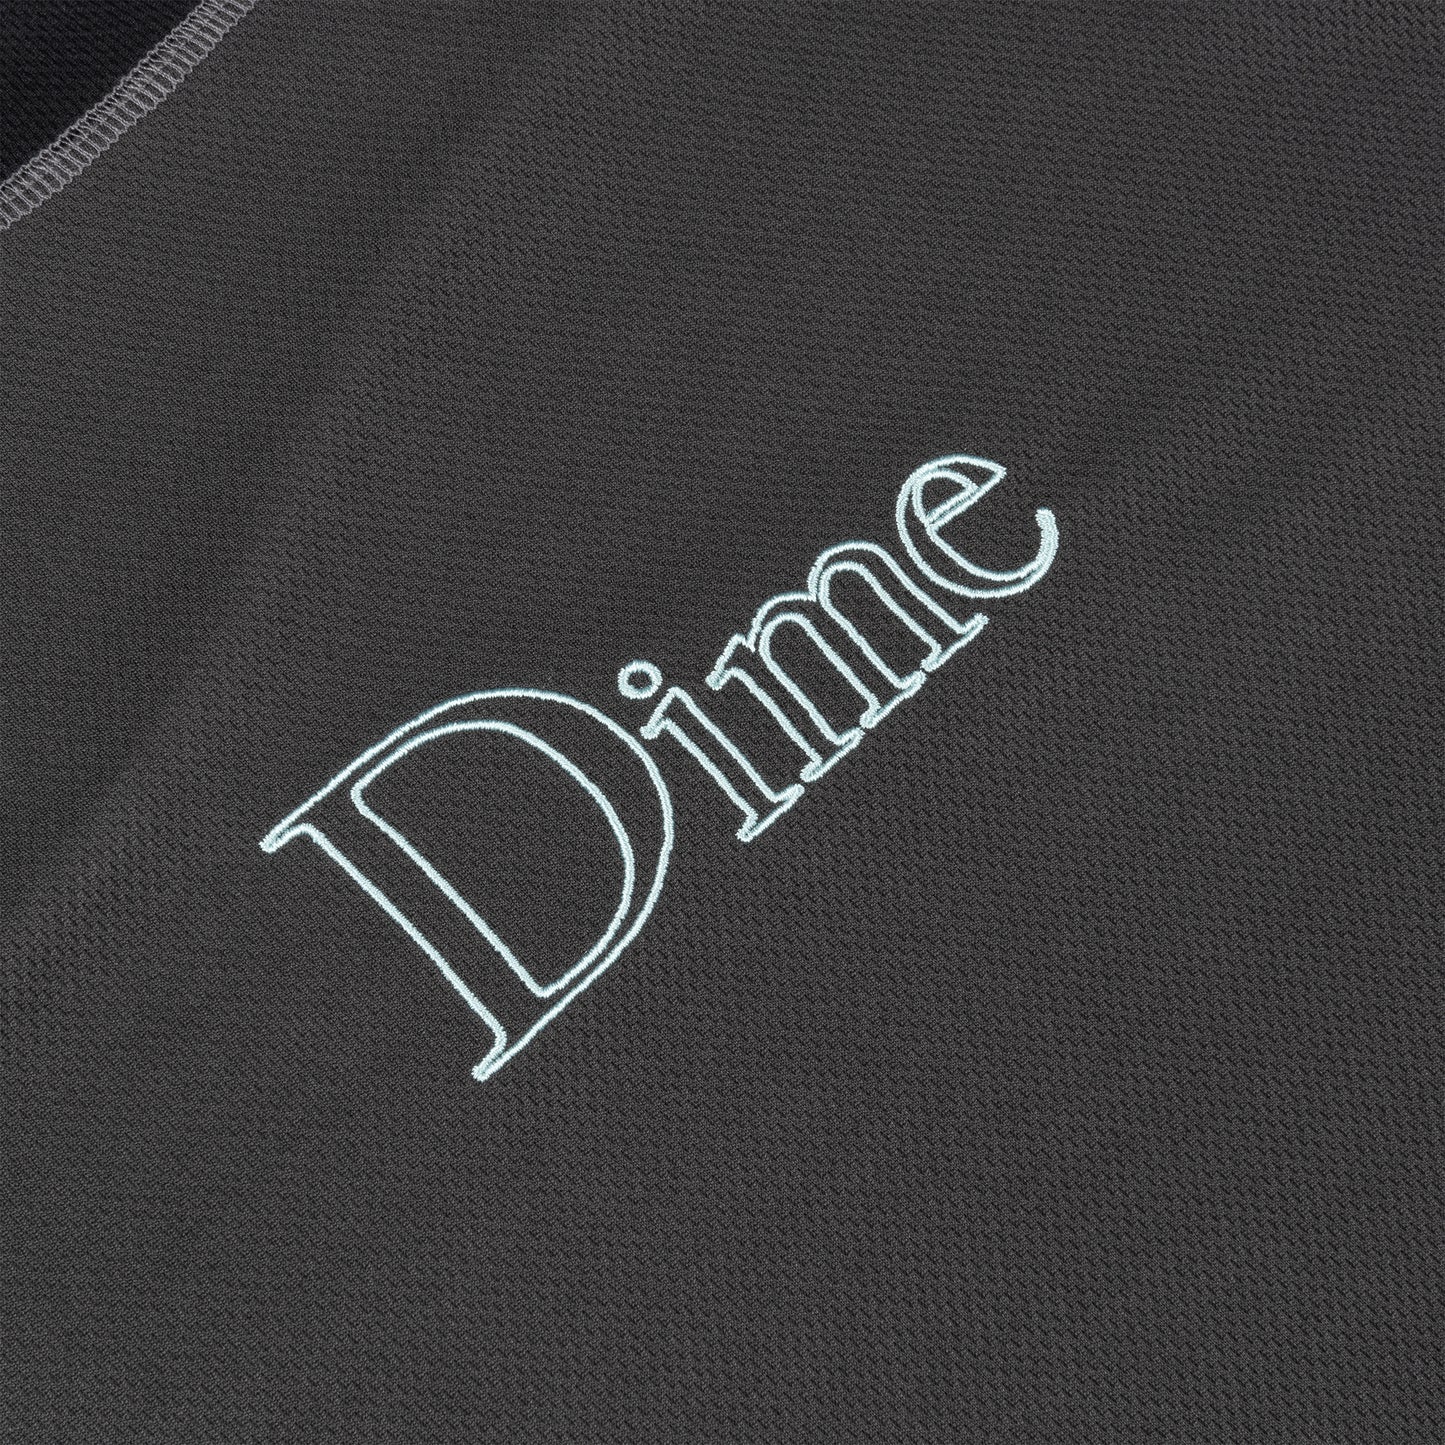 Dime ATHLETIC LONG SLEEVE "Charcoal"